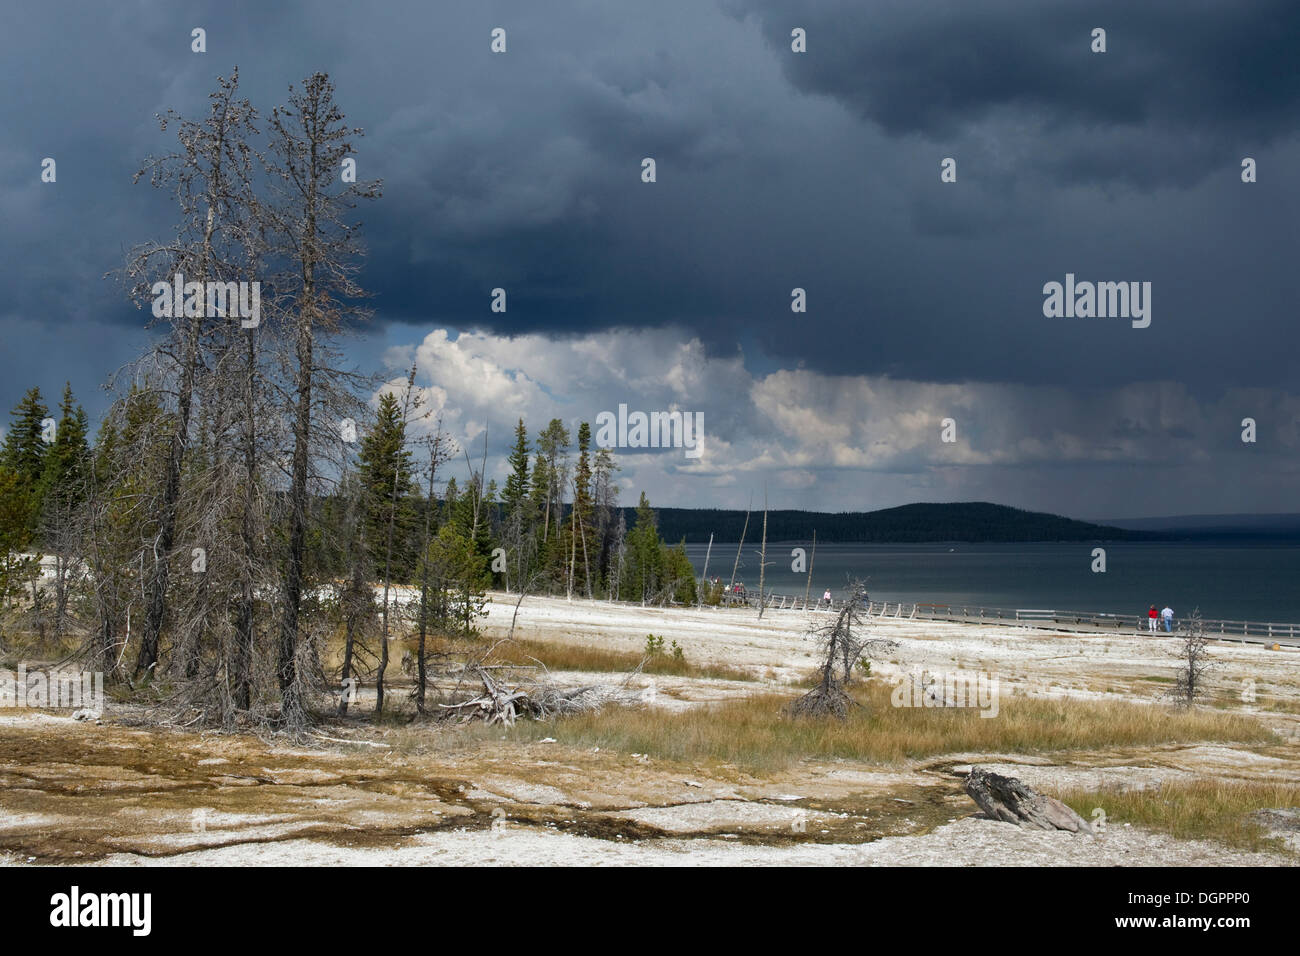 Thump West Geyser Basin, Parc National de Yellowstone, Wyoming, USA Banque D'Images